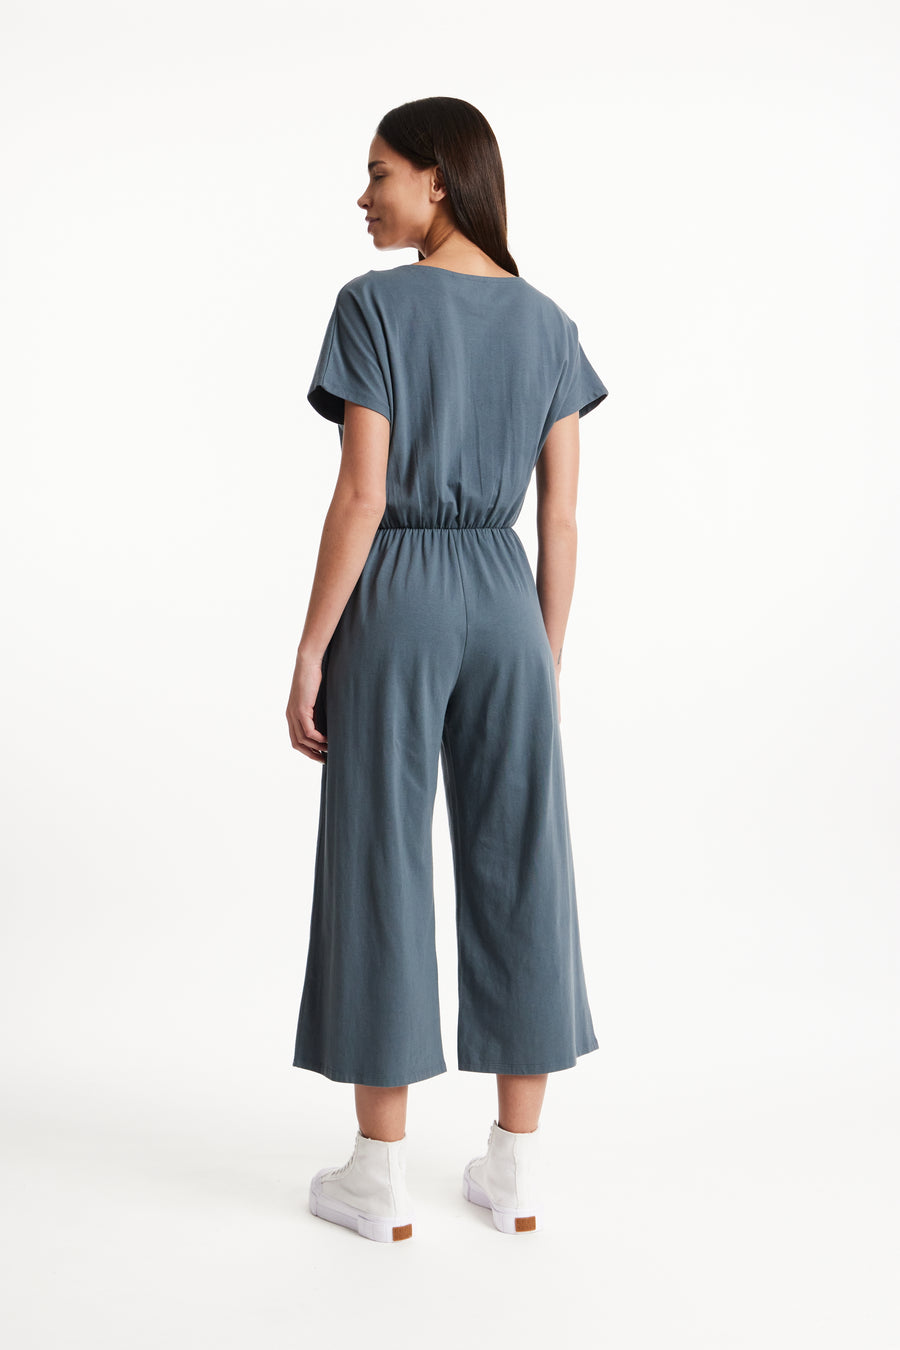 People Tree Fair Trade, Ethical & Sustainable Evelyn Jumpsuit in Dark grey 95% organic certified cotton, 5% elastane